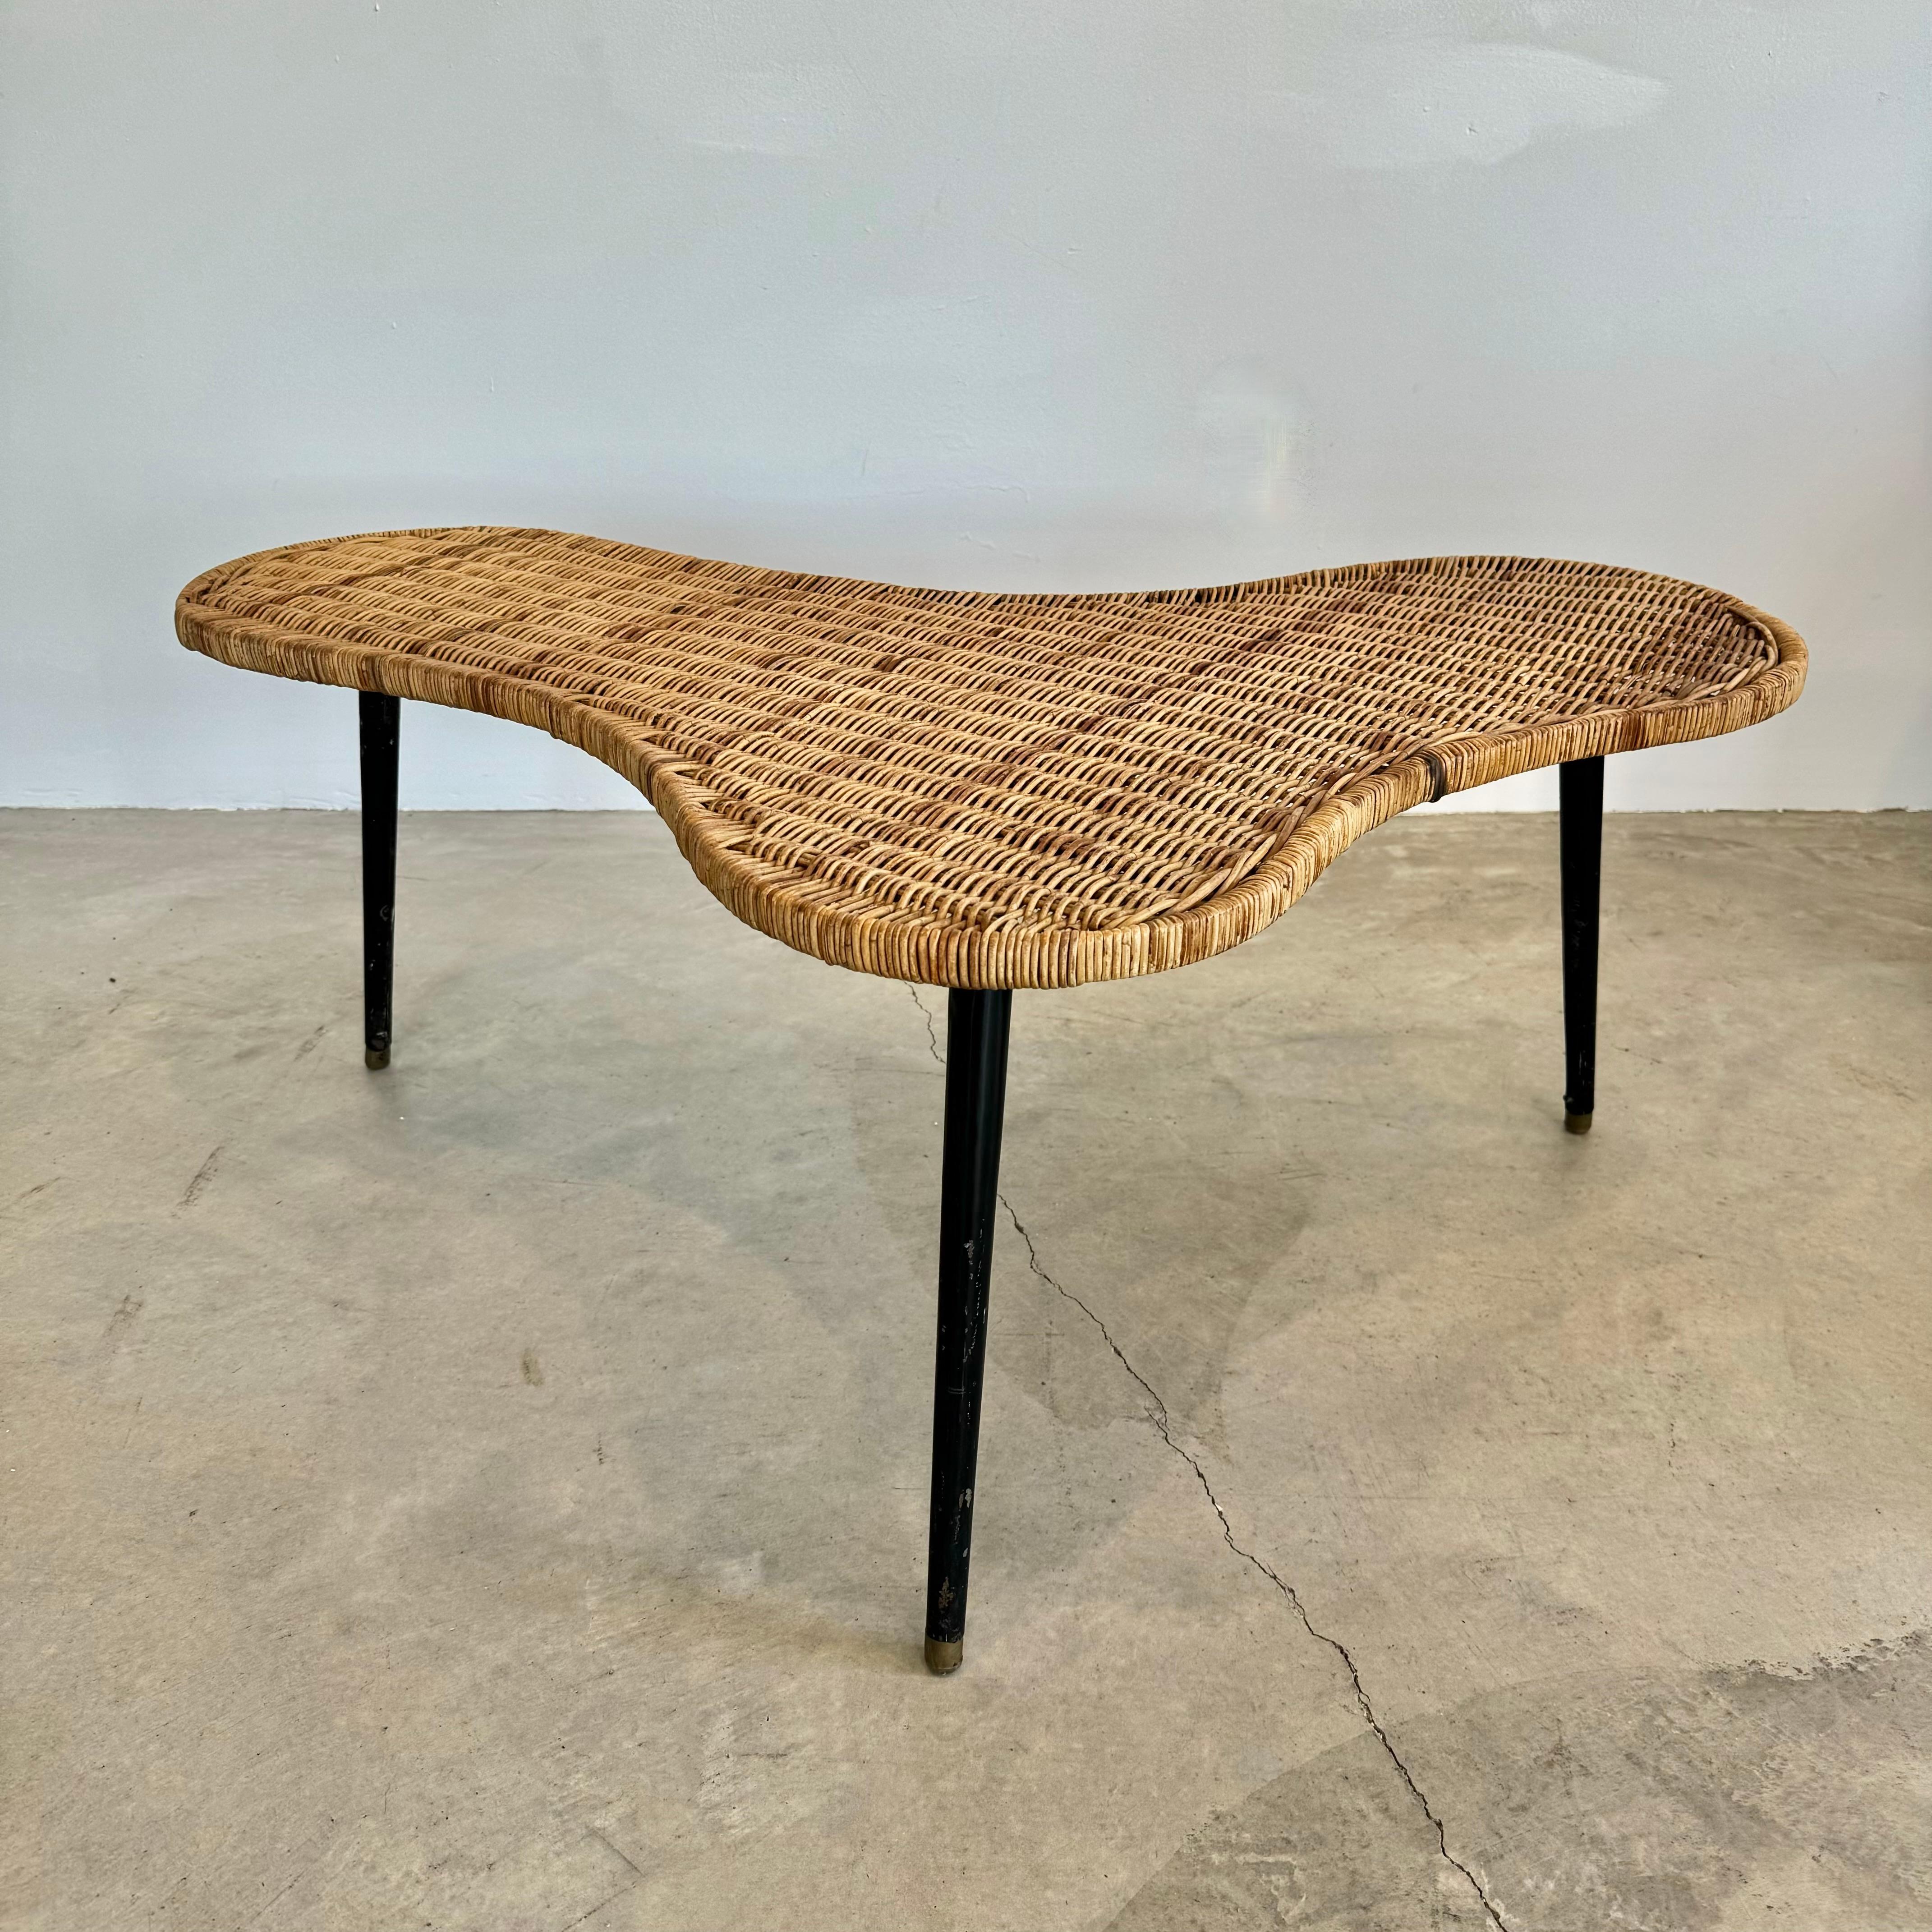 Sculptural wicker and iron coffee table made in France, circa 1950s. Biomorphic amoeba shape. Supported underneath with iron bars extending throughout. Table sits atop three thick iron legs. In the style of T.H Robsjohn-Gibbings and Raoul Guys. Both